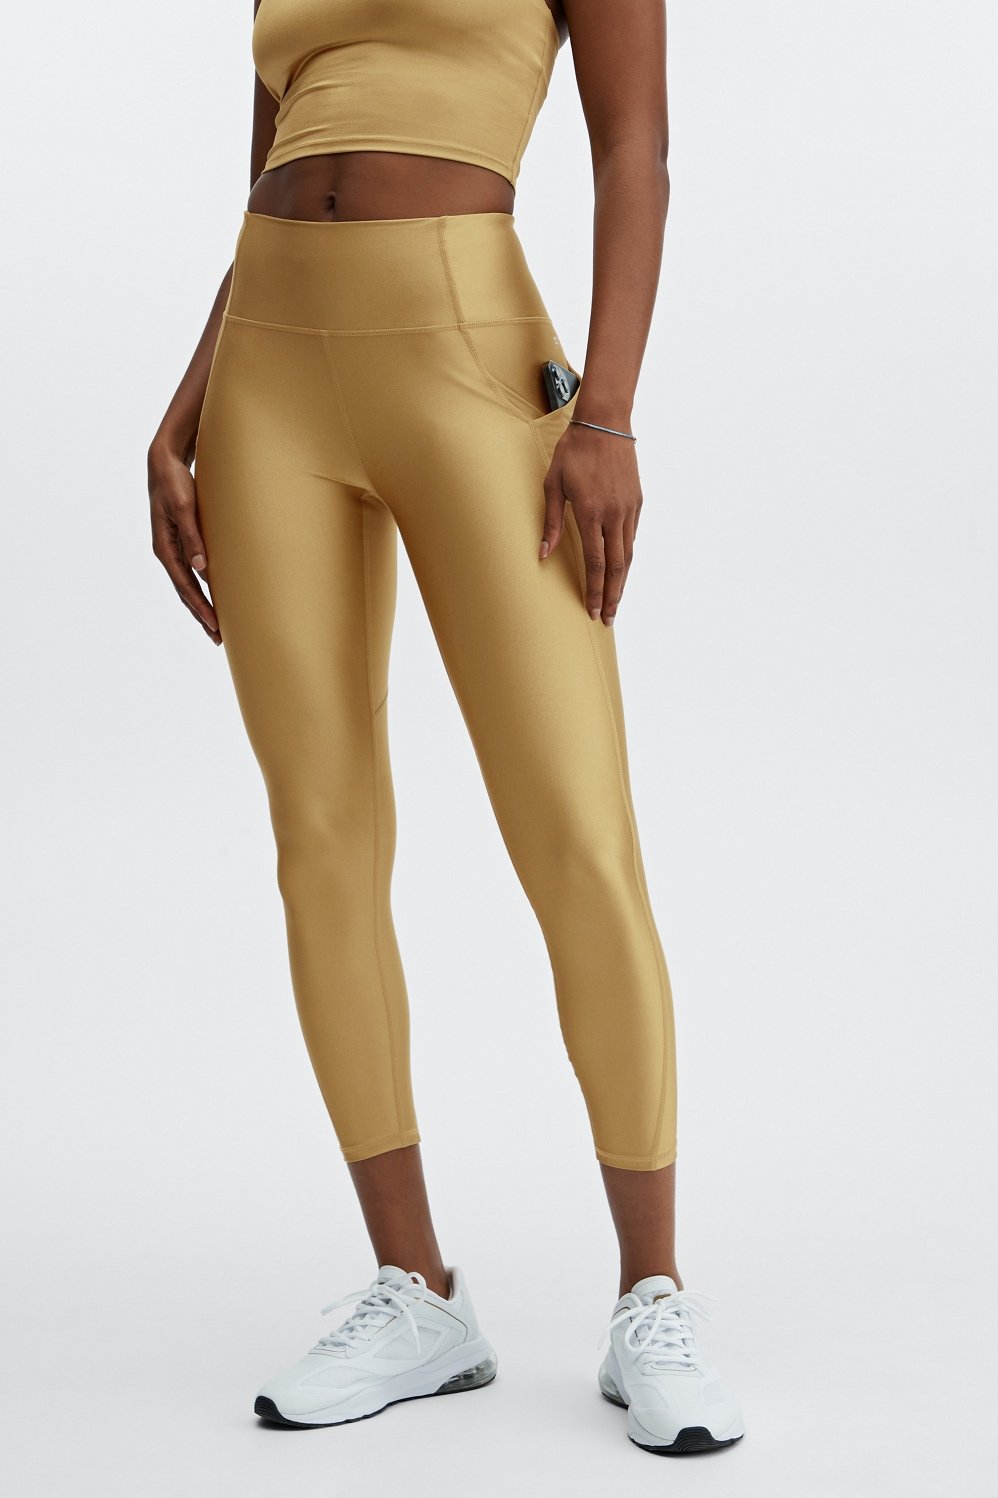 Oasis PureLuxe High-Waisted Shine 7/8 Legging - Fabletics Canada